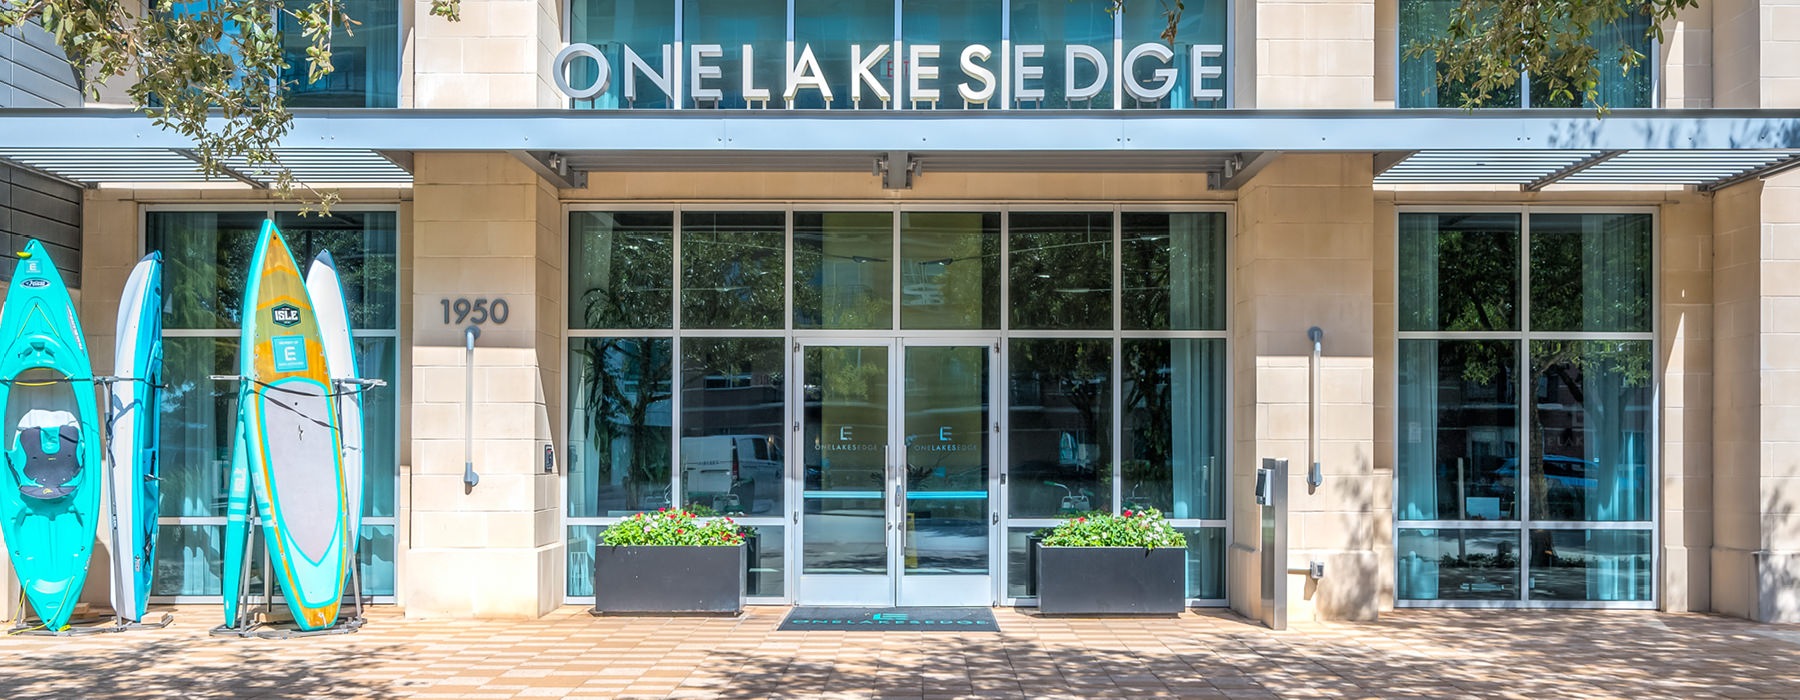 One Lakes Edge Leasing Office